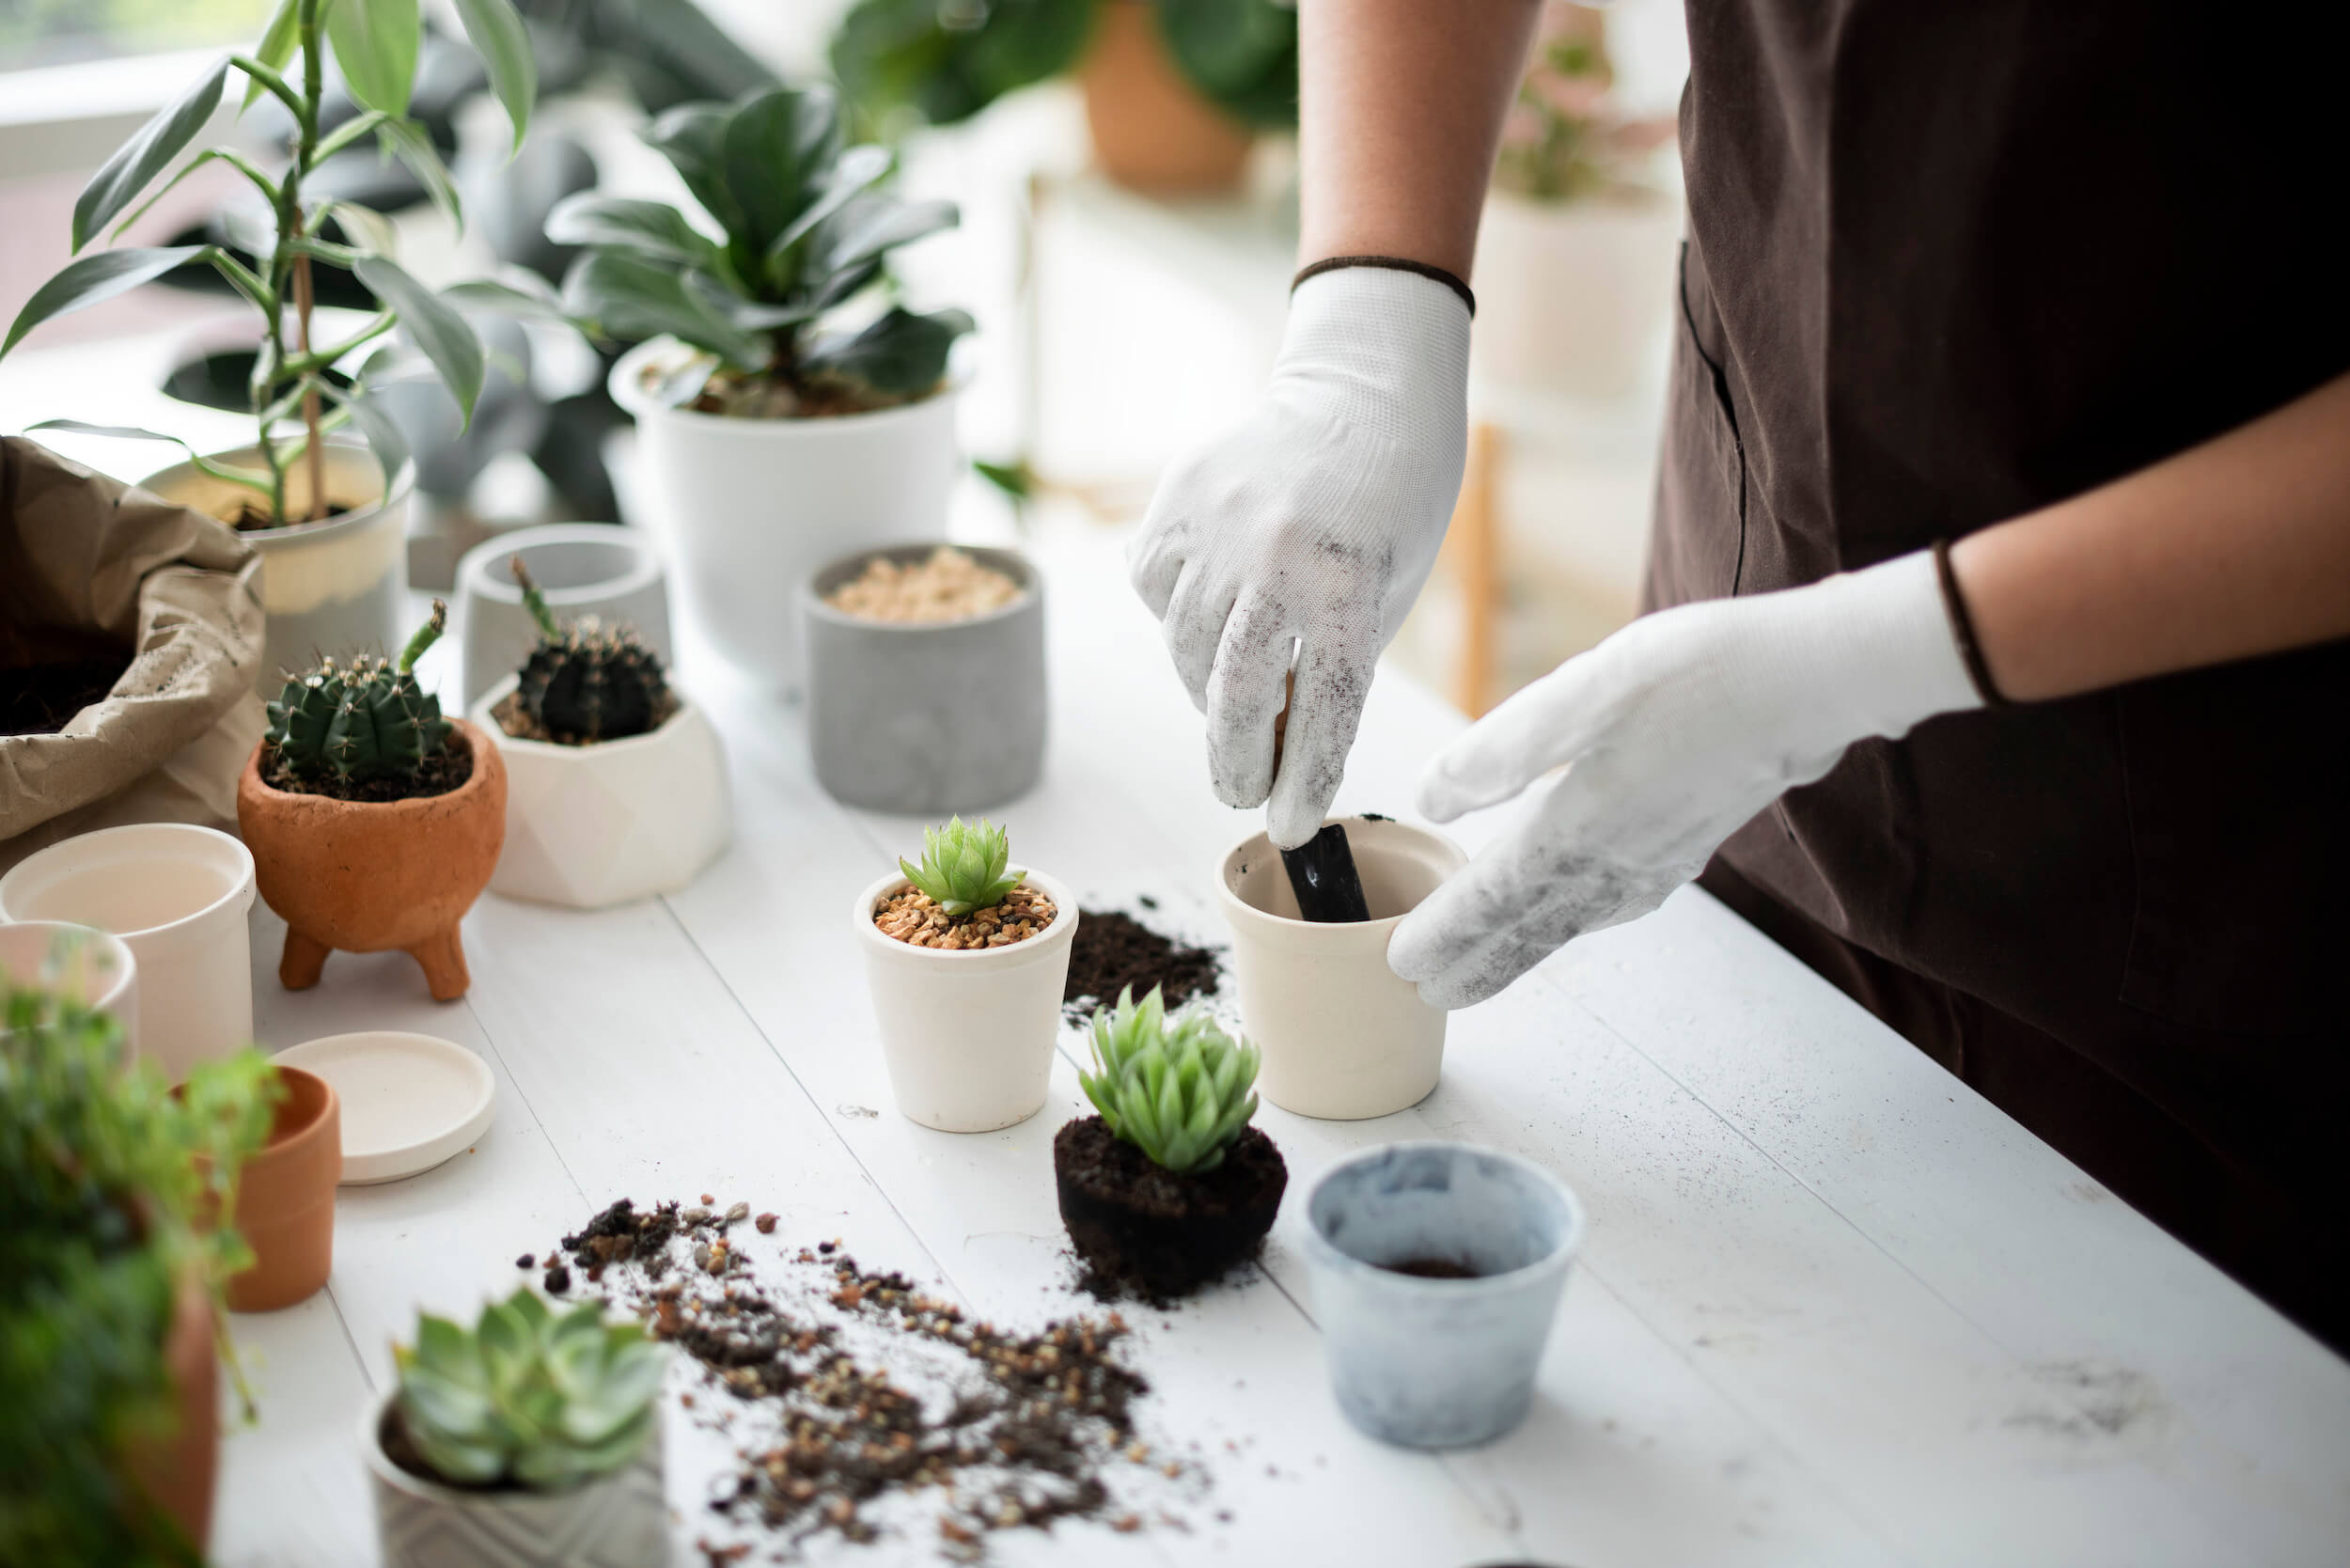 Professional plant nursery worker repotting a plant